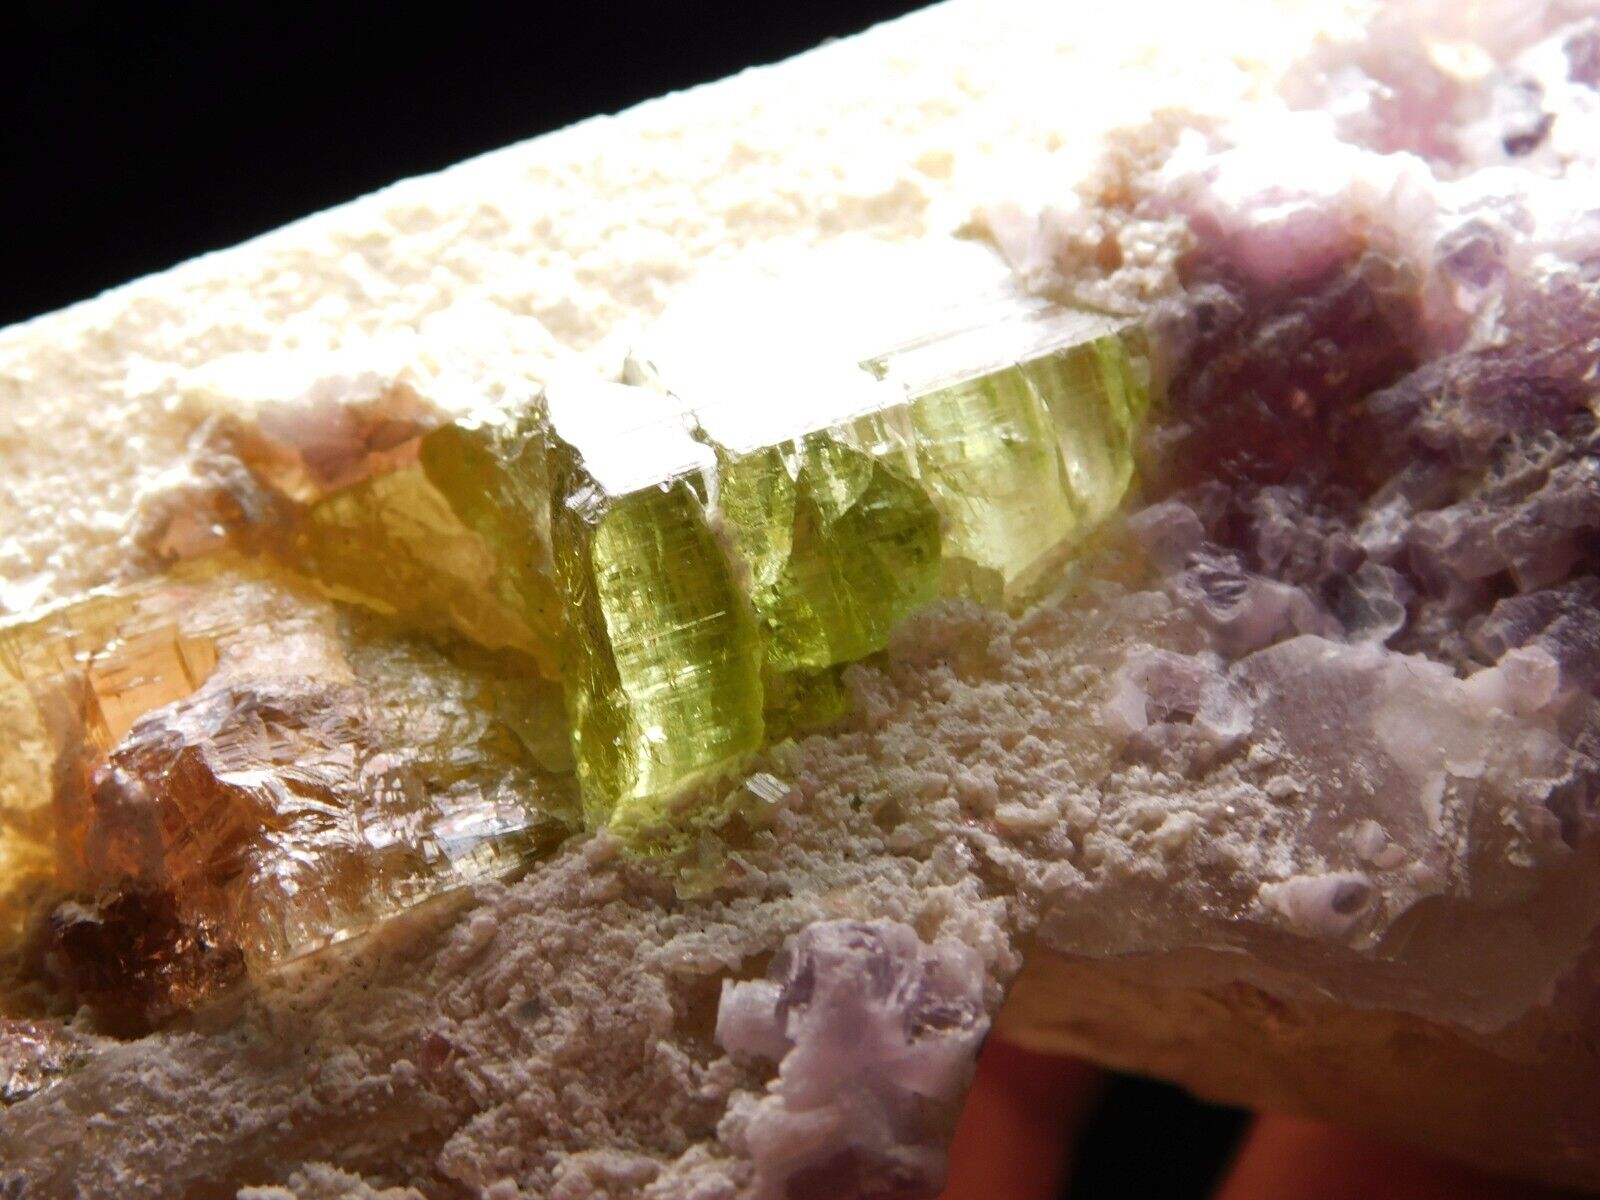 Watermelon Tourmaline Crystal on a Larger Quartz Crystal with Lepidolite 369gr